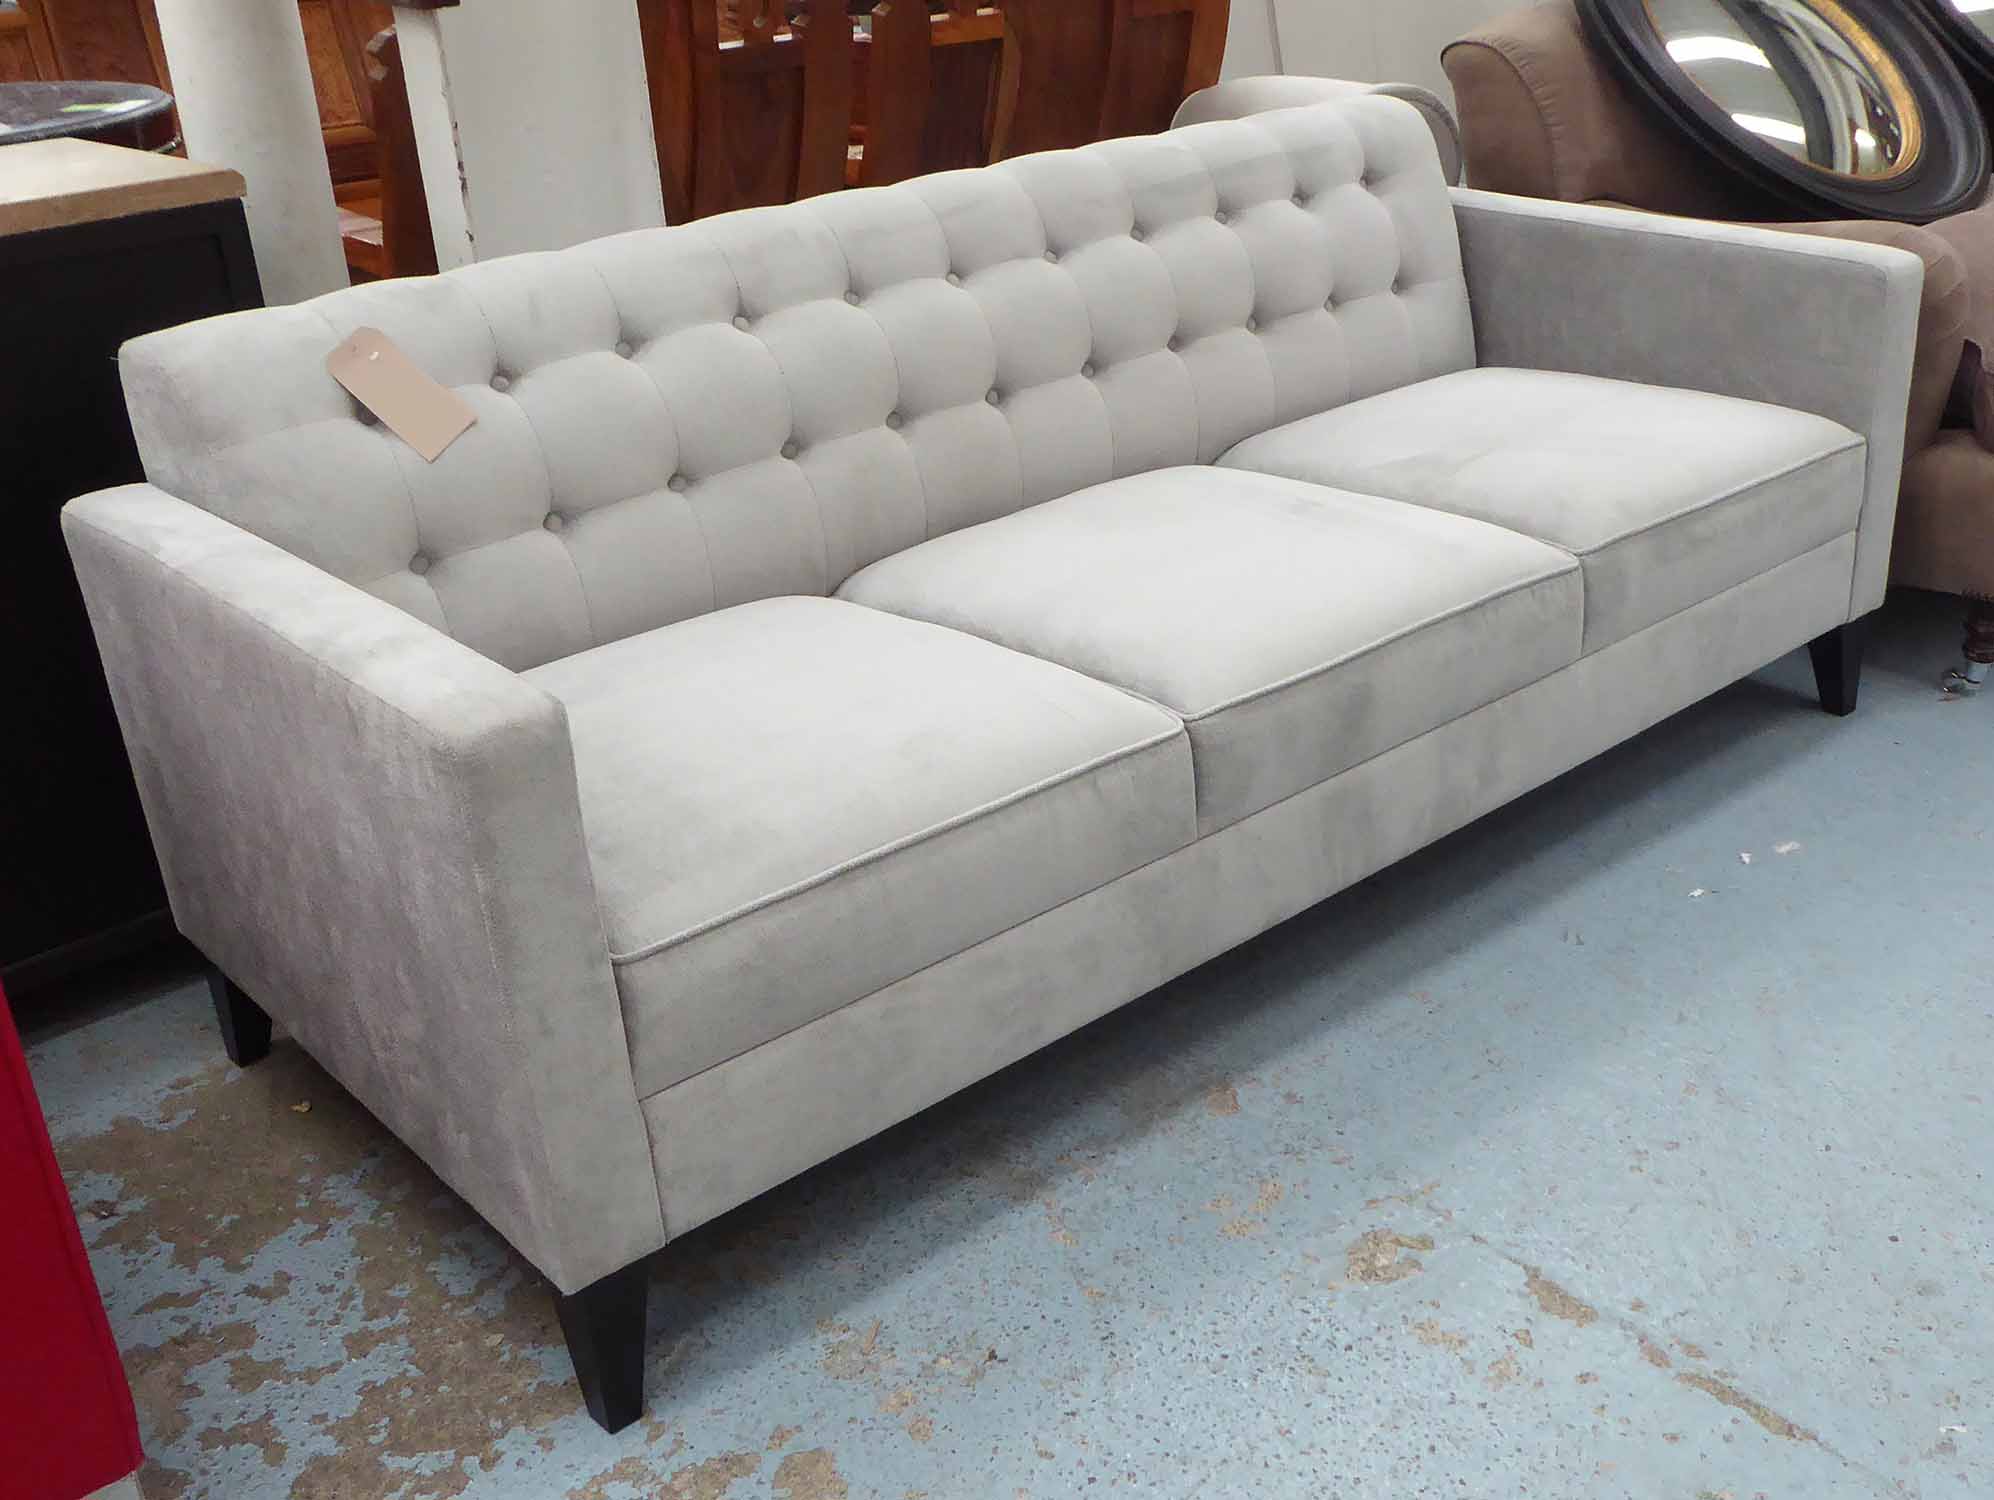 SOFA, button back in grey upholstery, 190cm x 90cm x 80cm H.